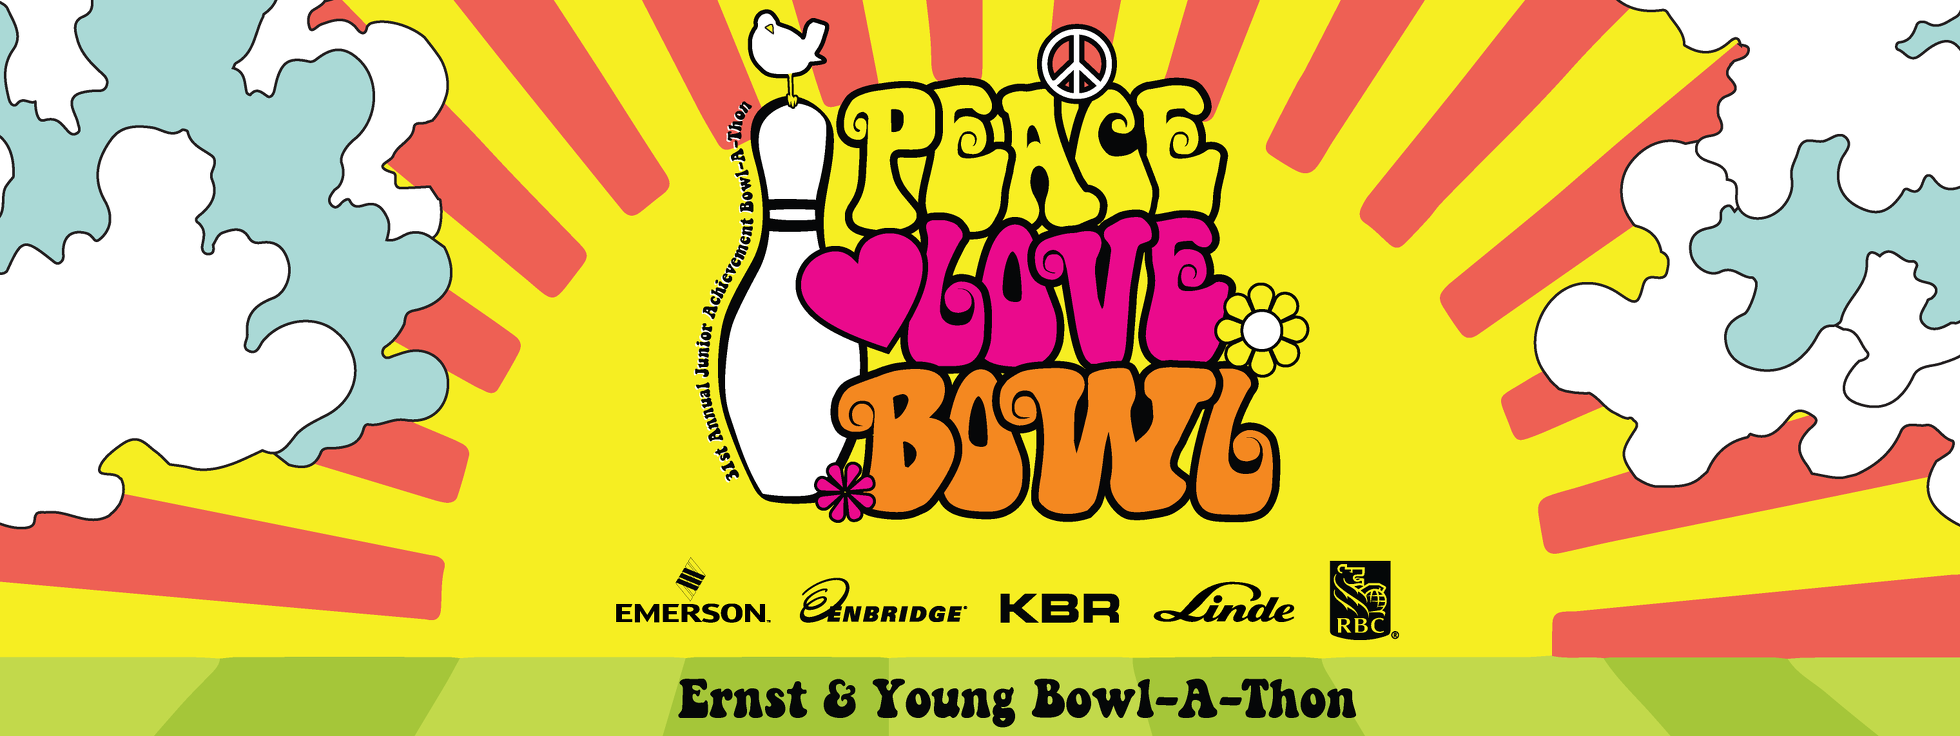 Ernst & Young Bowl-A-Thon